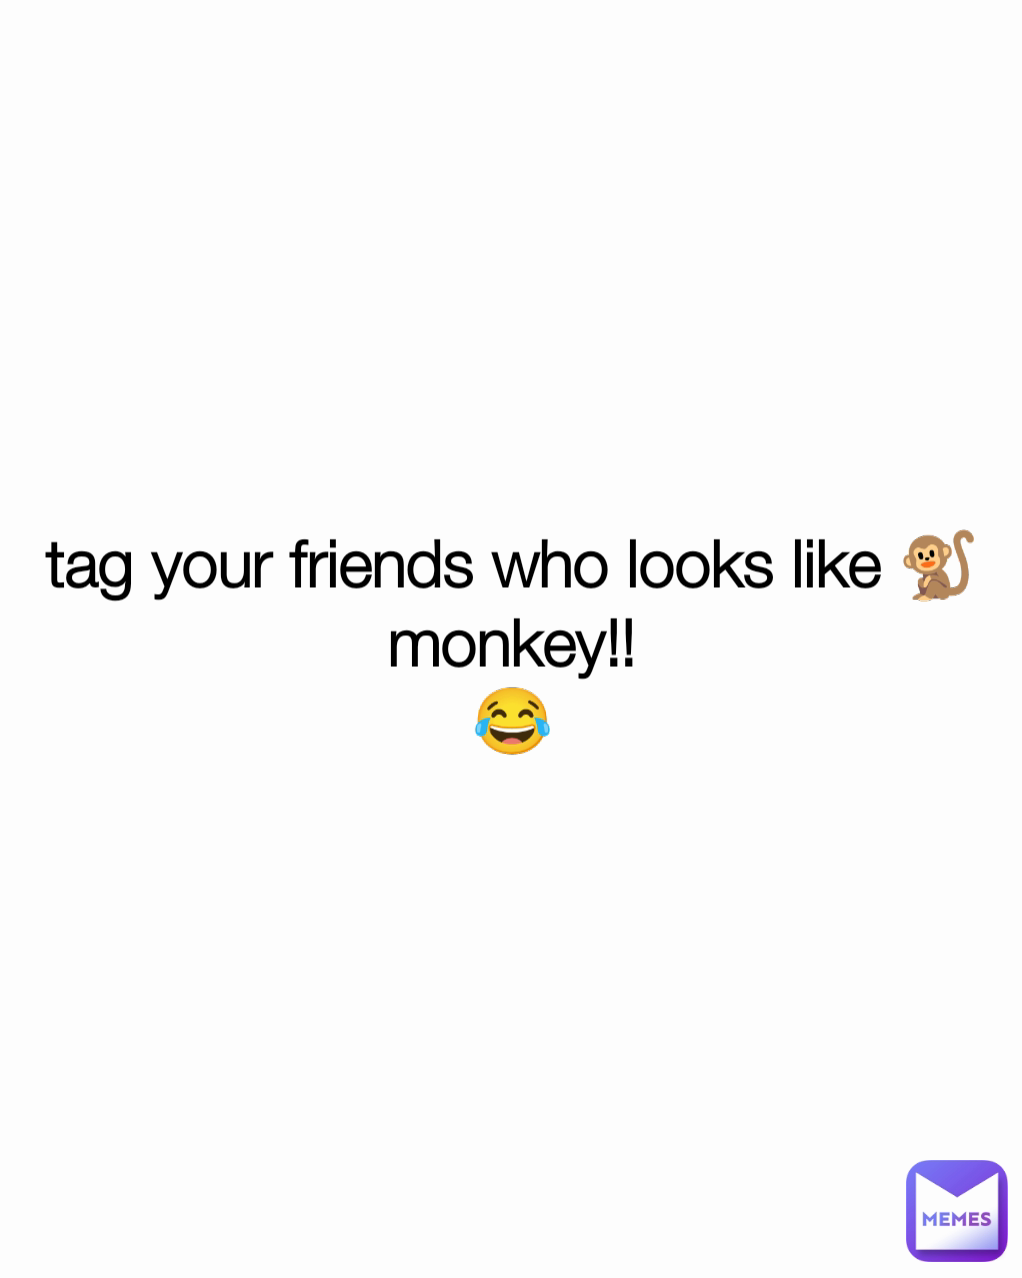 tag your friends who looks like 🐒 monkey!!
😂